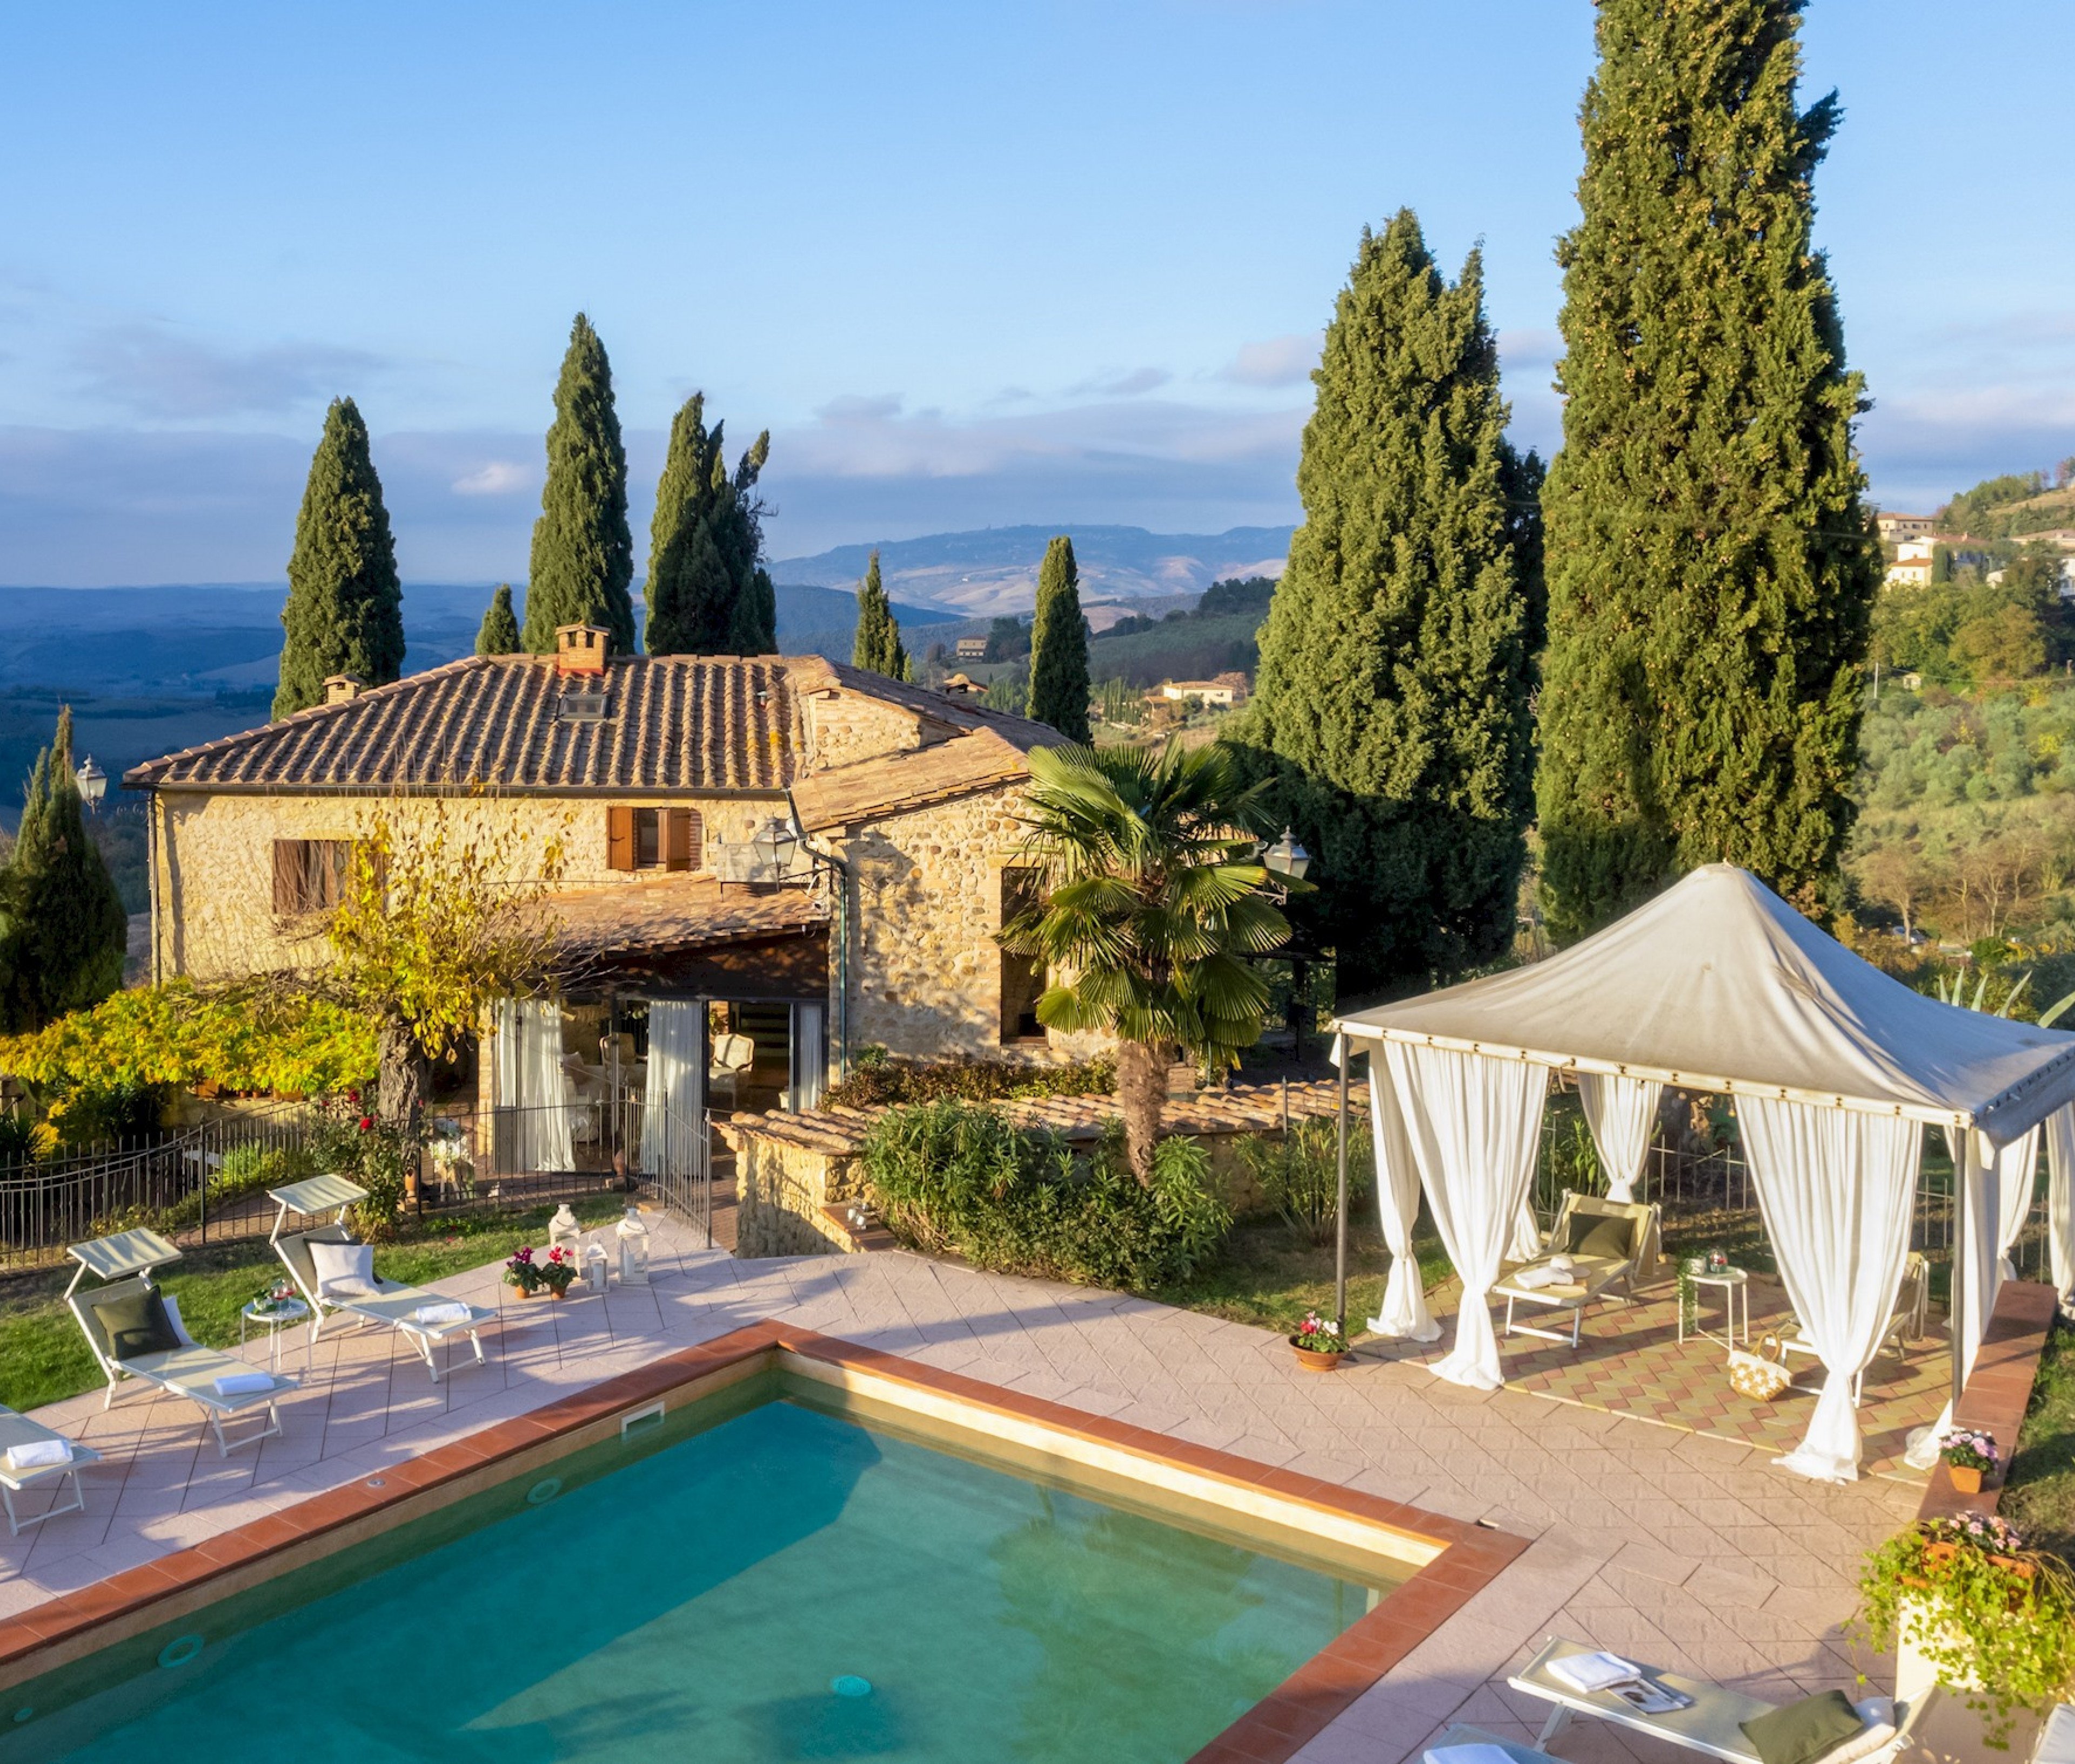 Villa Beltramonto - Pisa holiday rentals with private pools